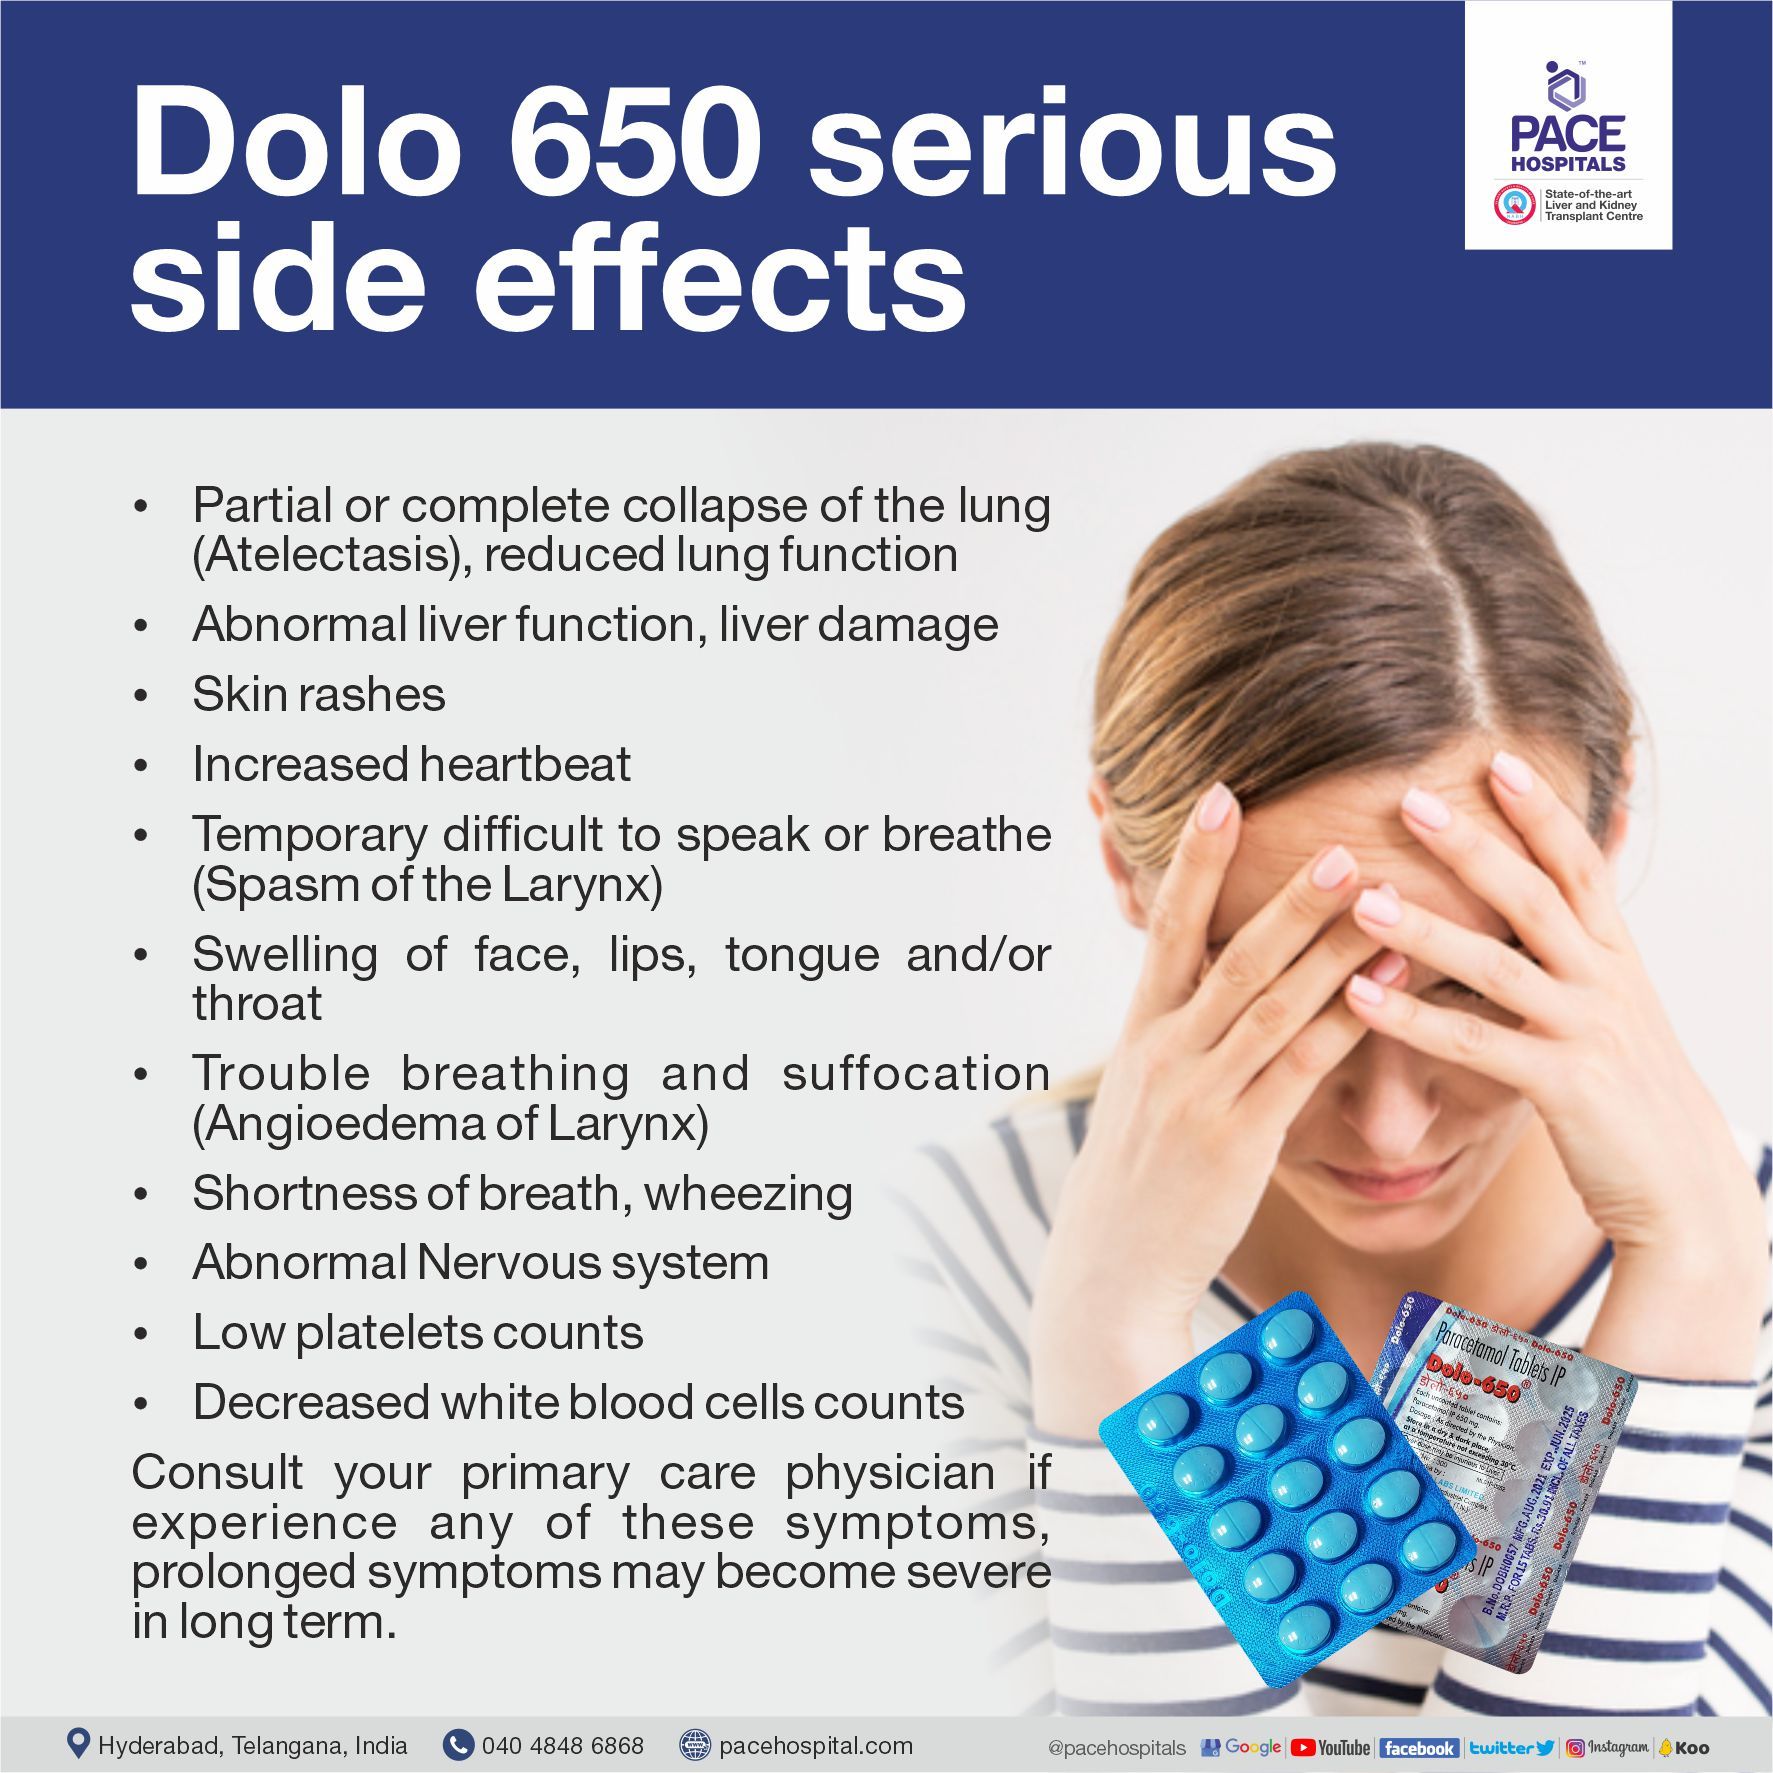 Serious side effects of Dolo 650 tablet